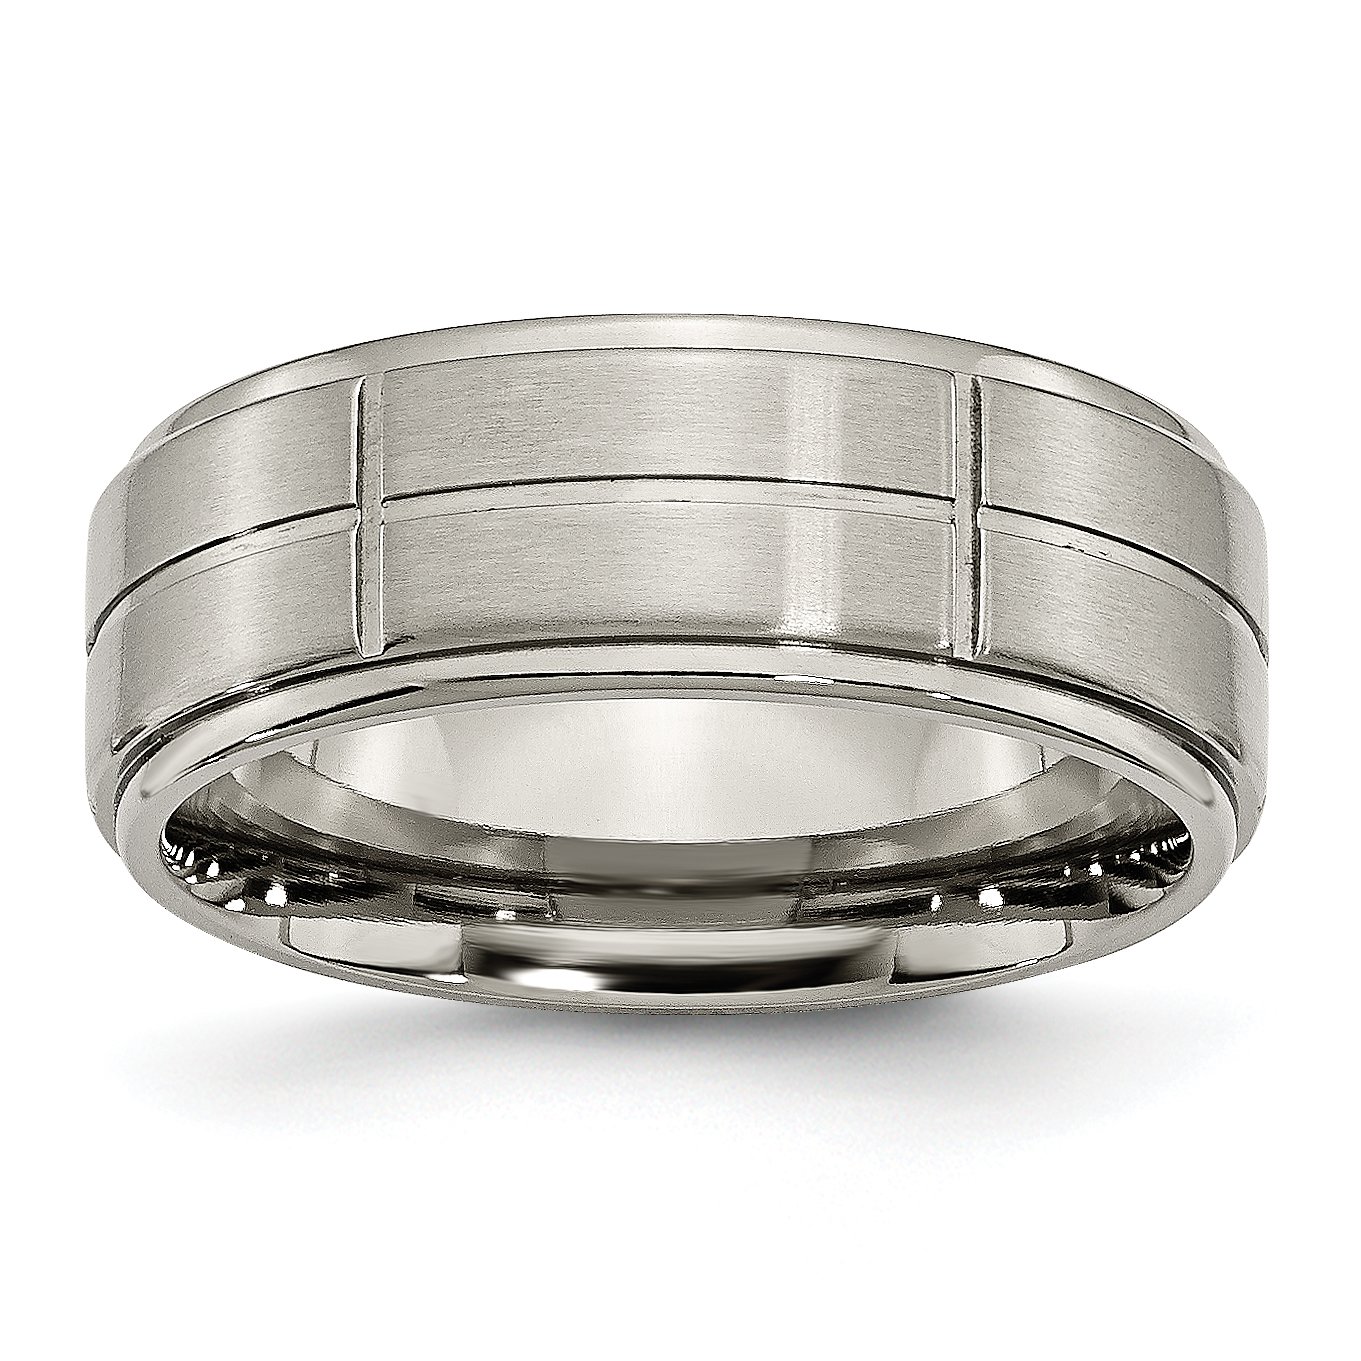 Findingking Titanium Grooved 8mm Satin Mens Wedding Ring Size 10